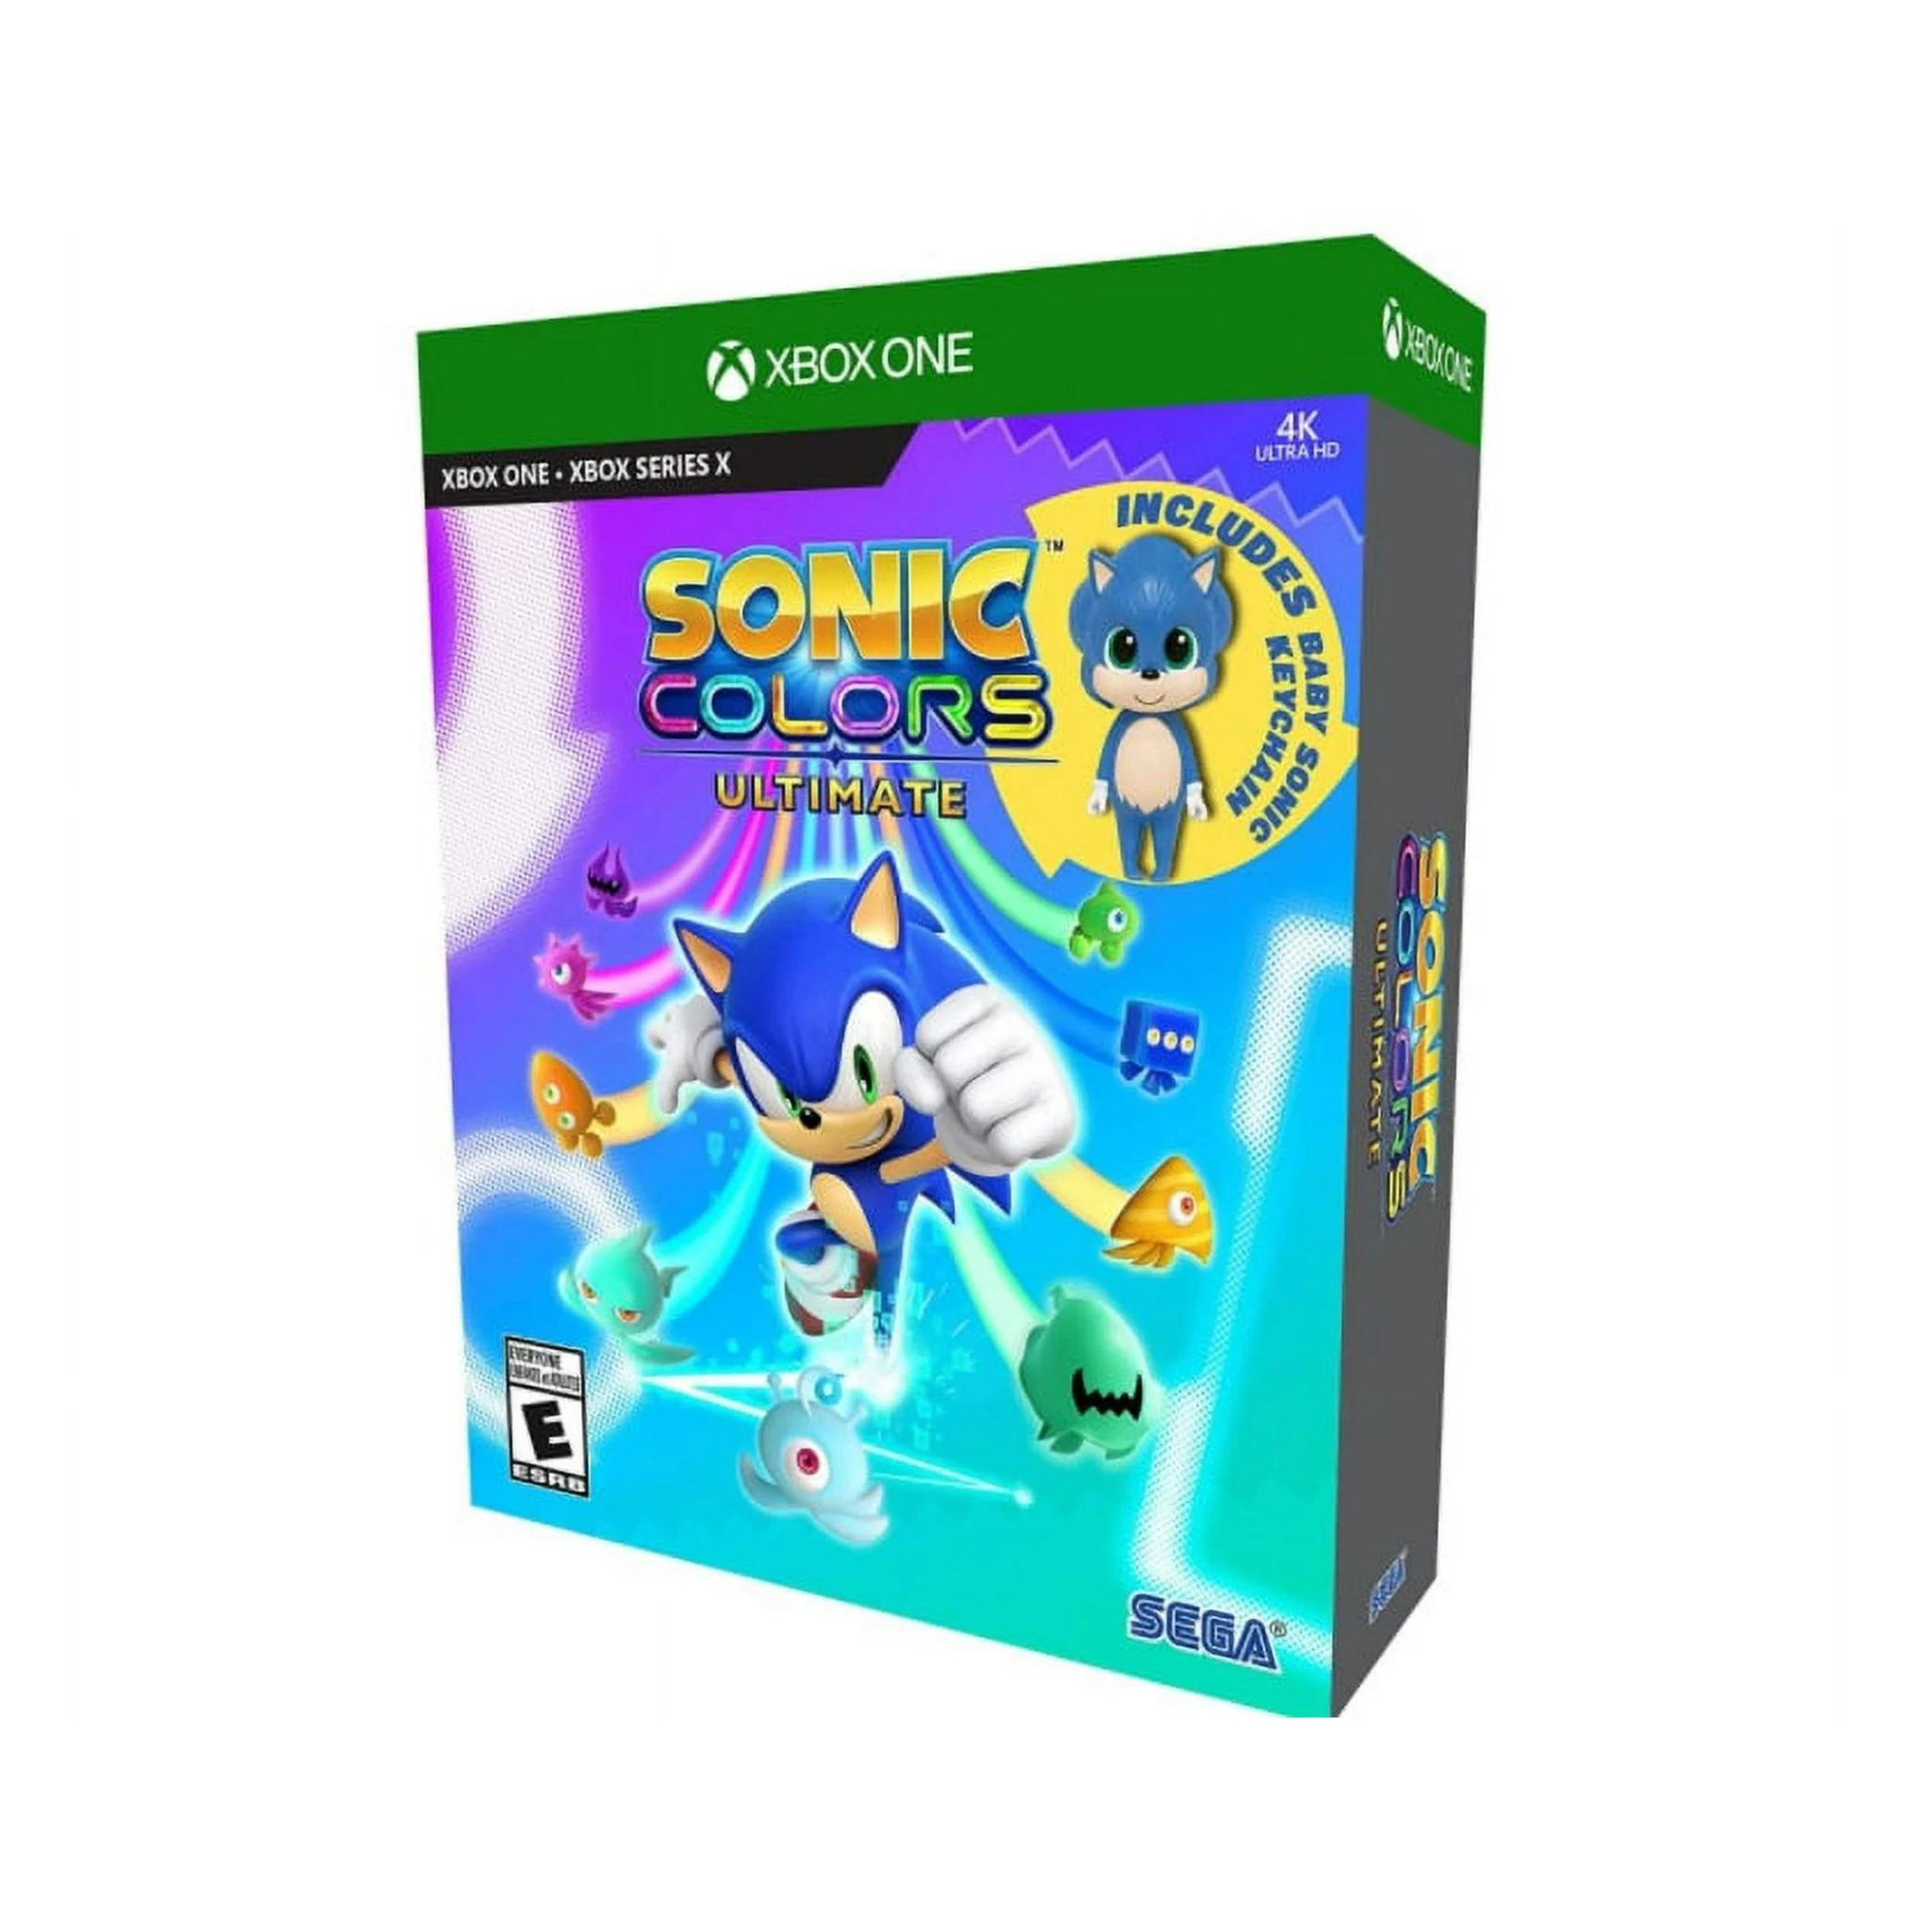 Sonic Colors Ultimate Standard Edition for Xbox Series X